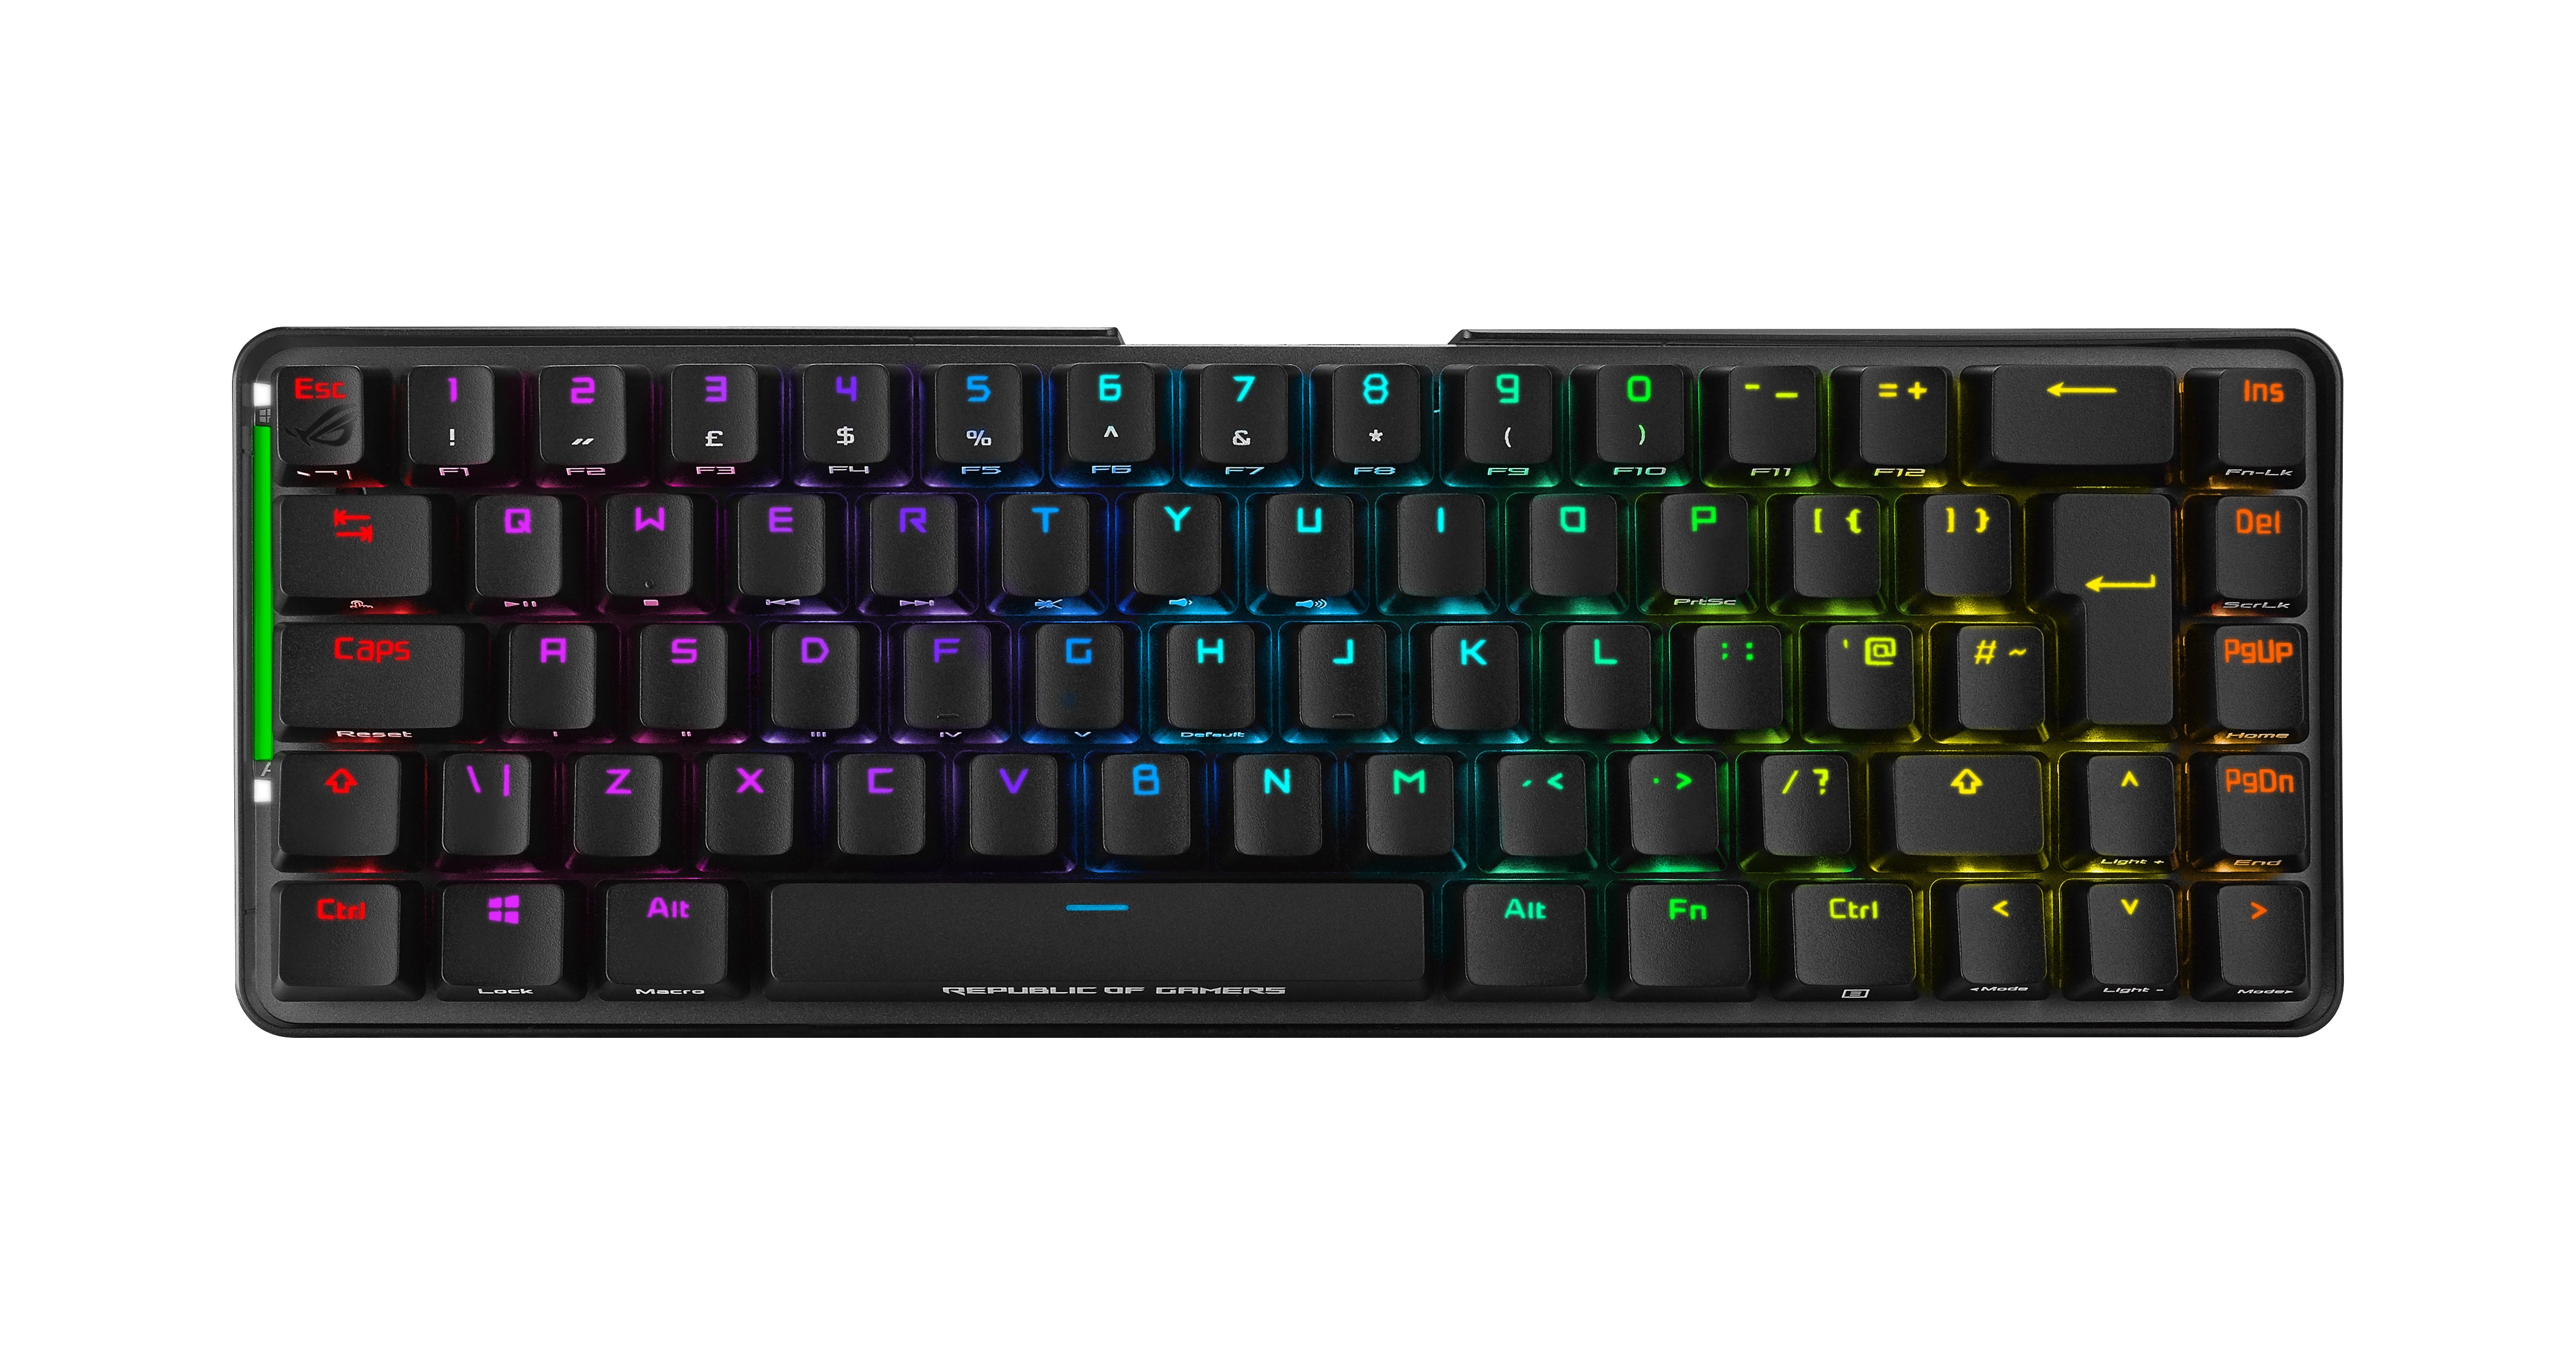 ASUS ROG FALCHION Wireless Mechanical RGB Gaming Keyboard 65% form-factor (Cherry MX Red)